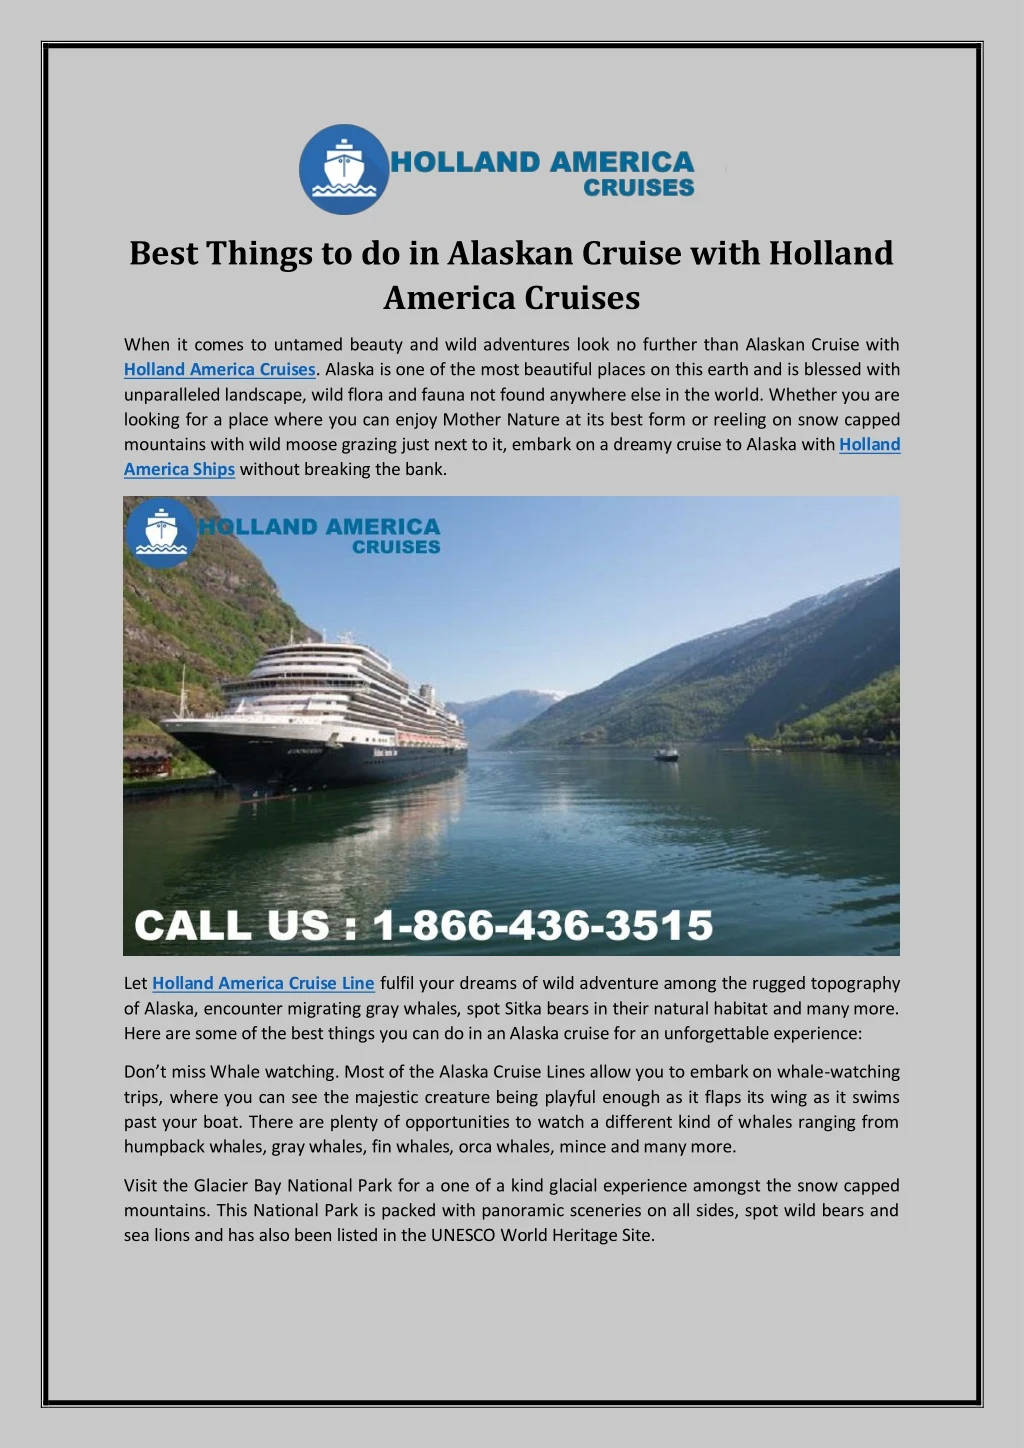 best things to do in alaskan cruise with holland